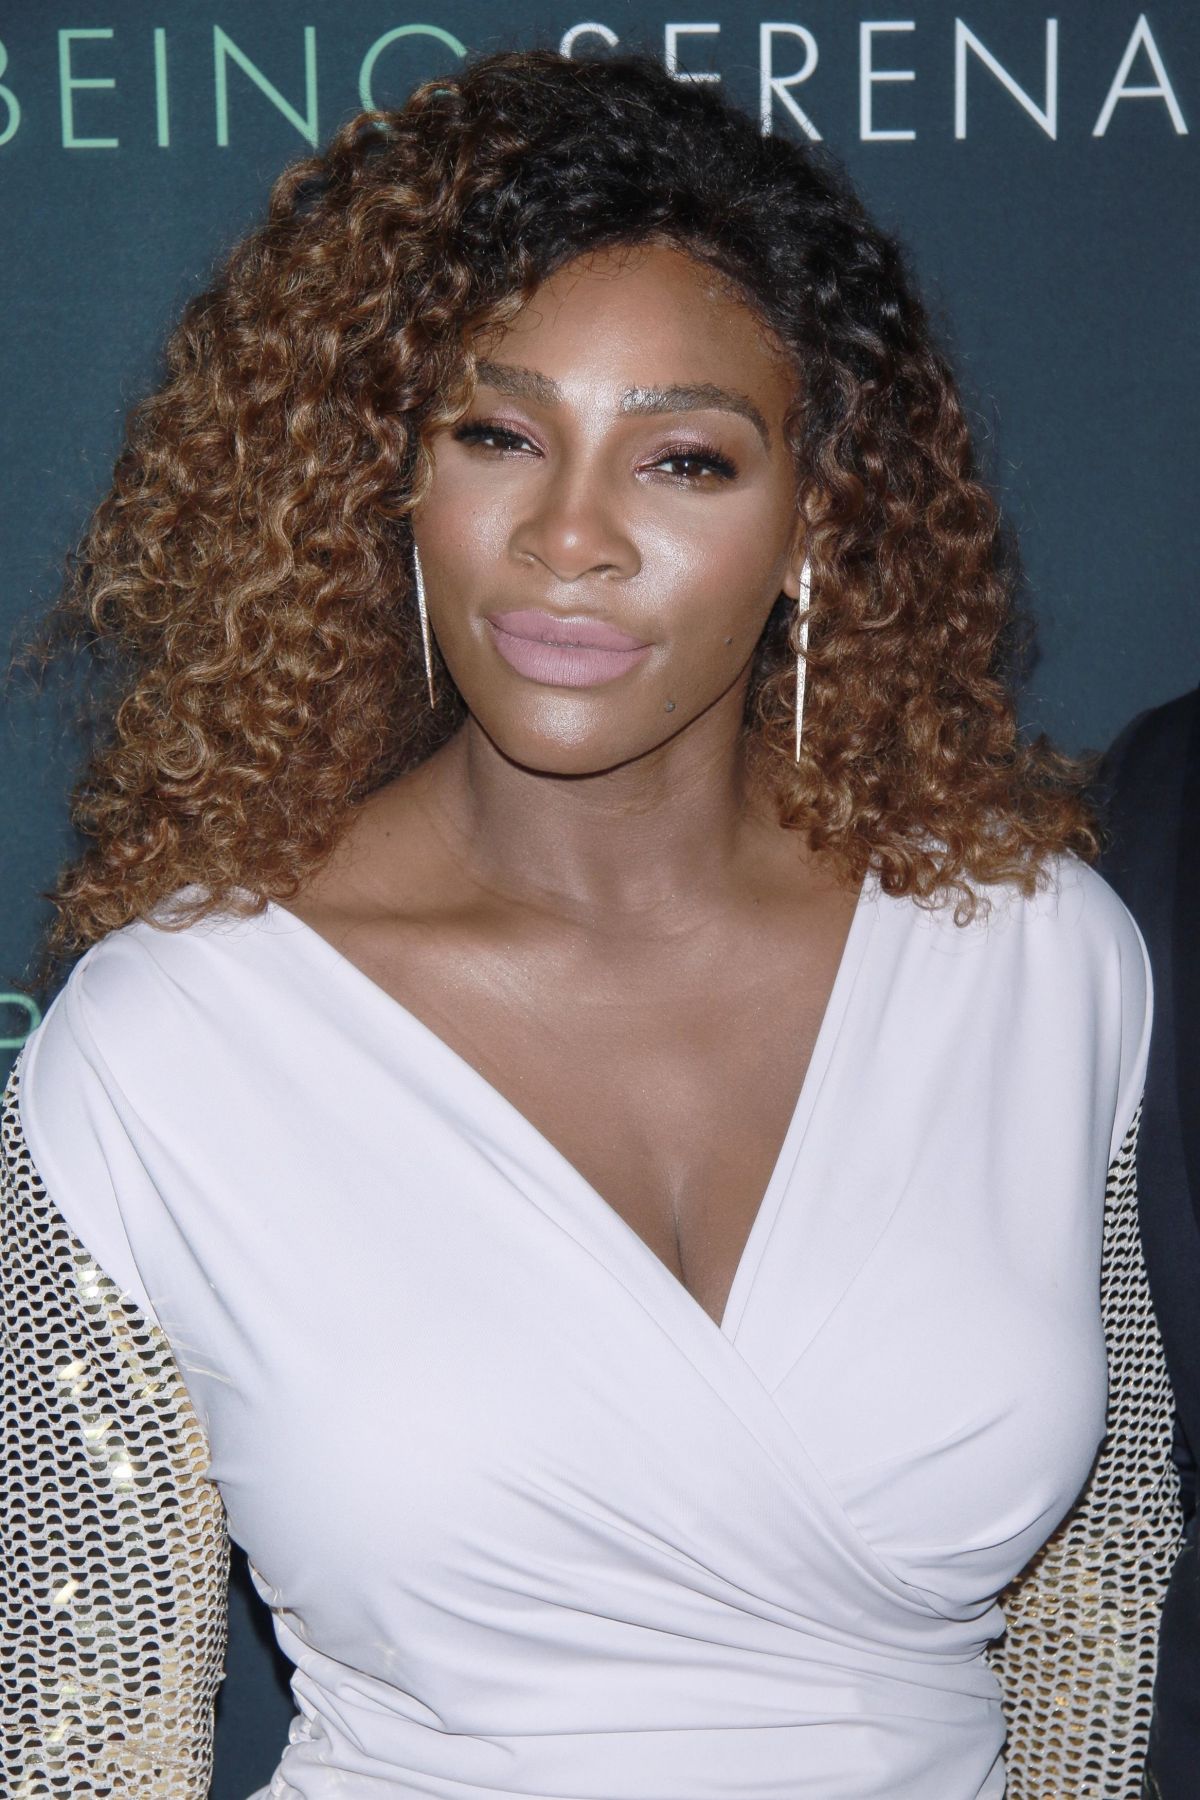 SERENA WILLIAMS at Being Serena. Her Story. Her Words Premiere in New